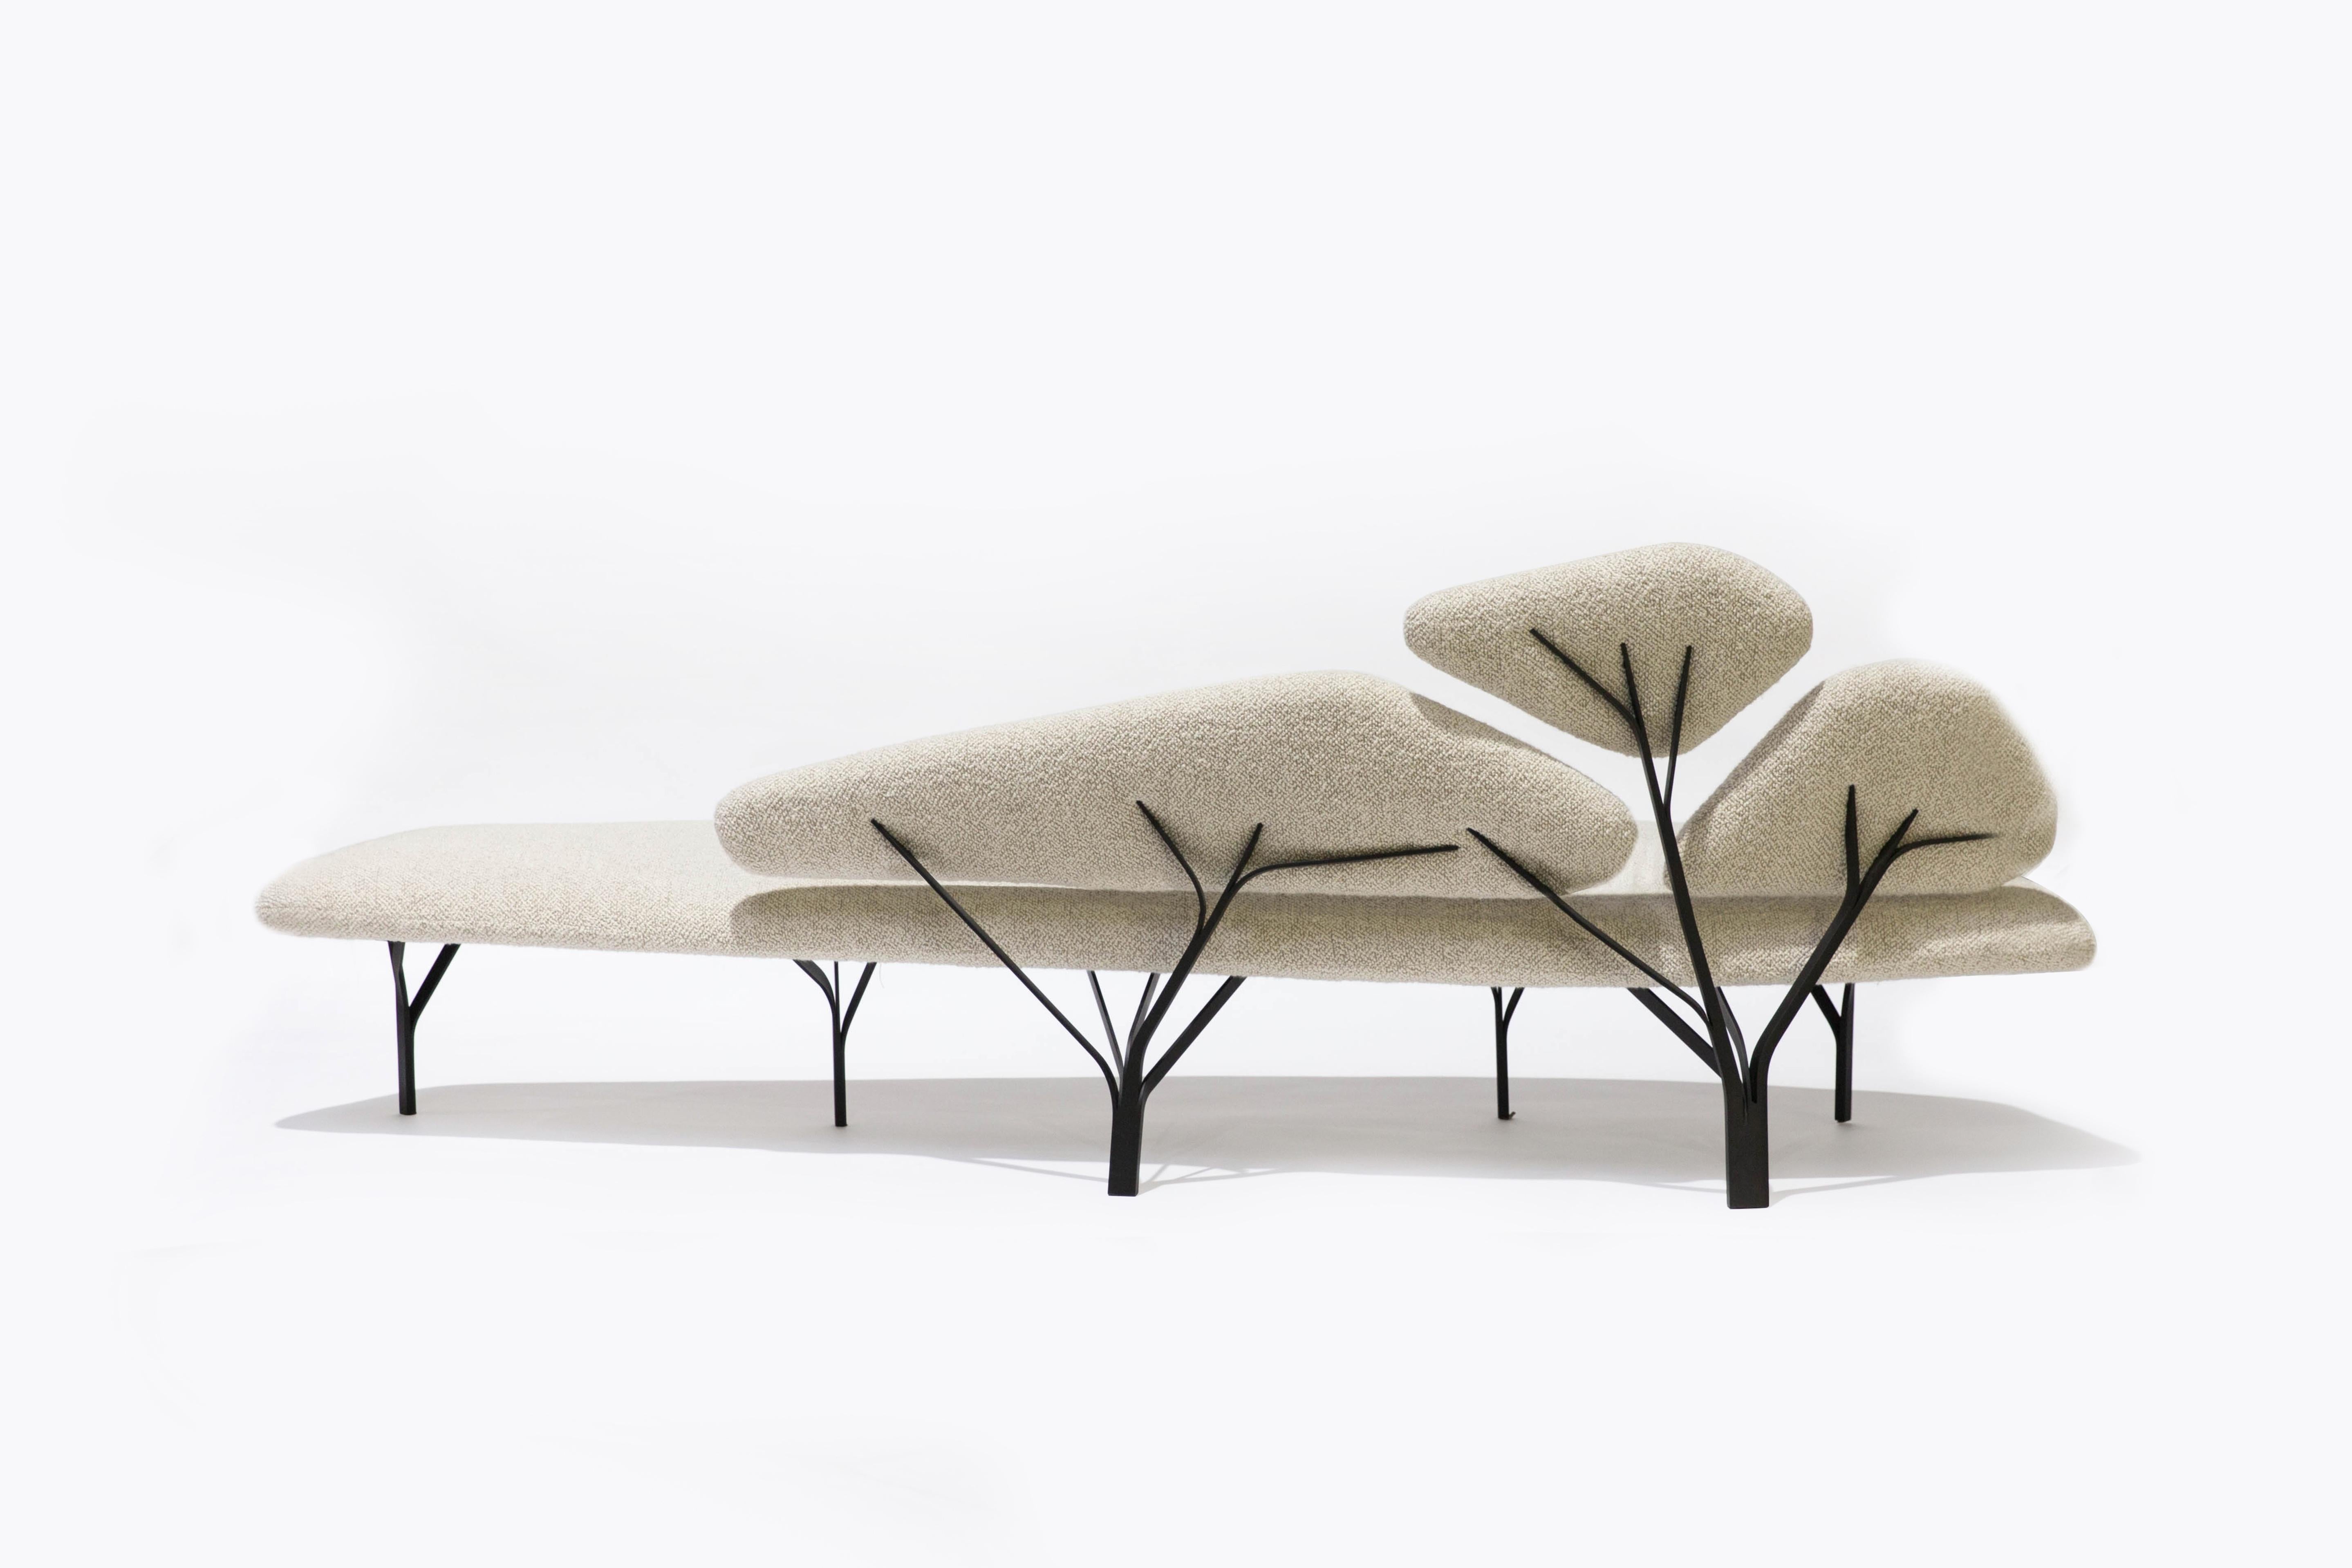 Borghese Sofa is a sculptural piece directly inspired and named after the pine trees of the Villa Borghese gardens in Roma.
The characteristic network of branches is translated as a graphic steel framework to support a trio of cushion.
The